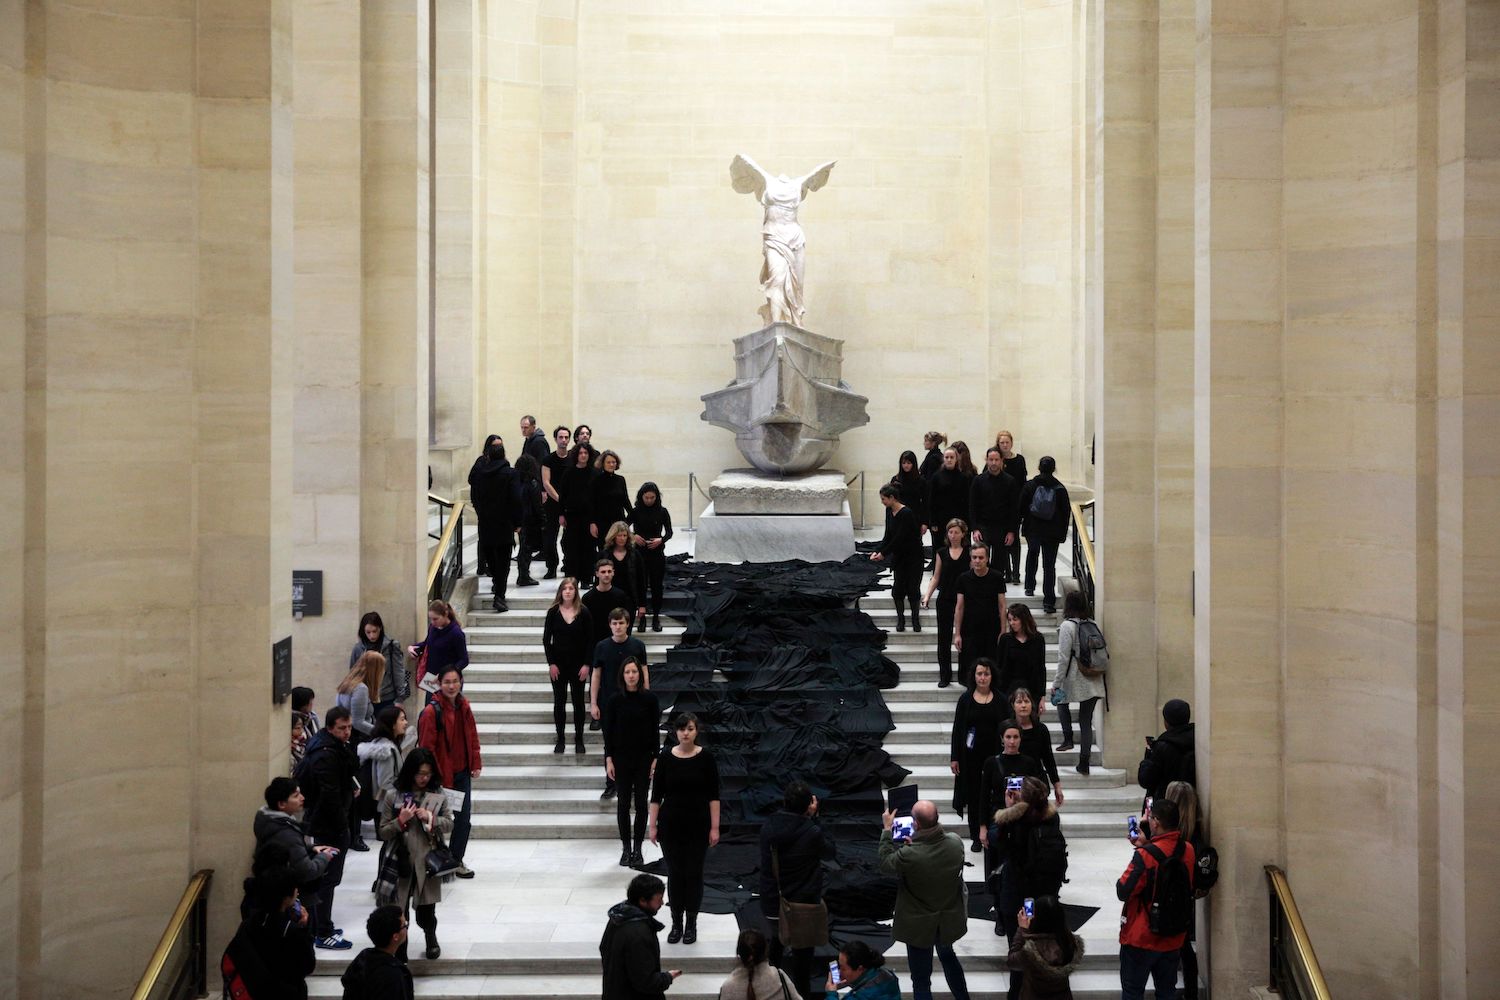 Louis Vuitton to stage catwalk in the Louvre Museum